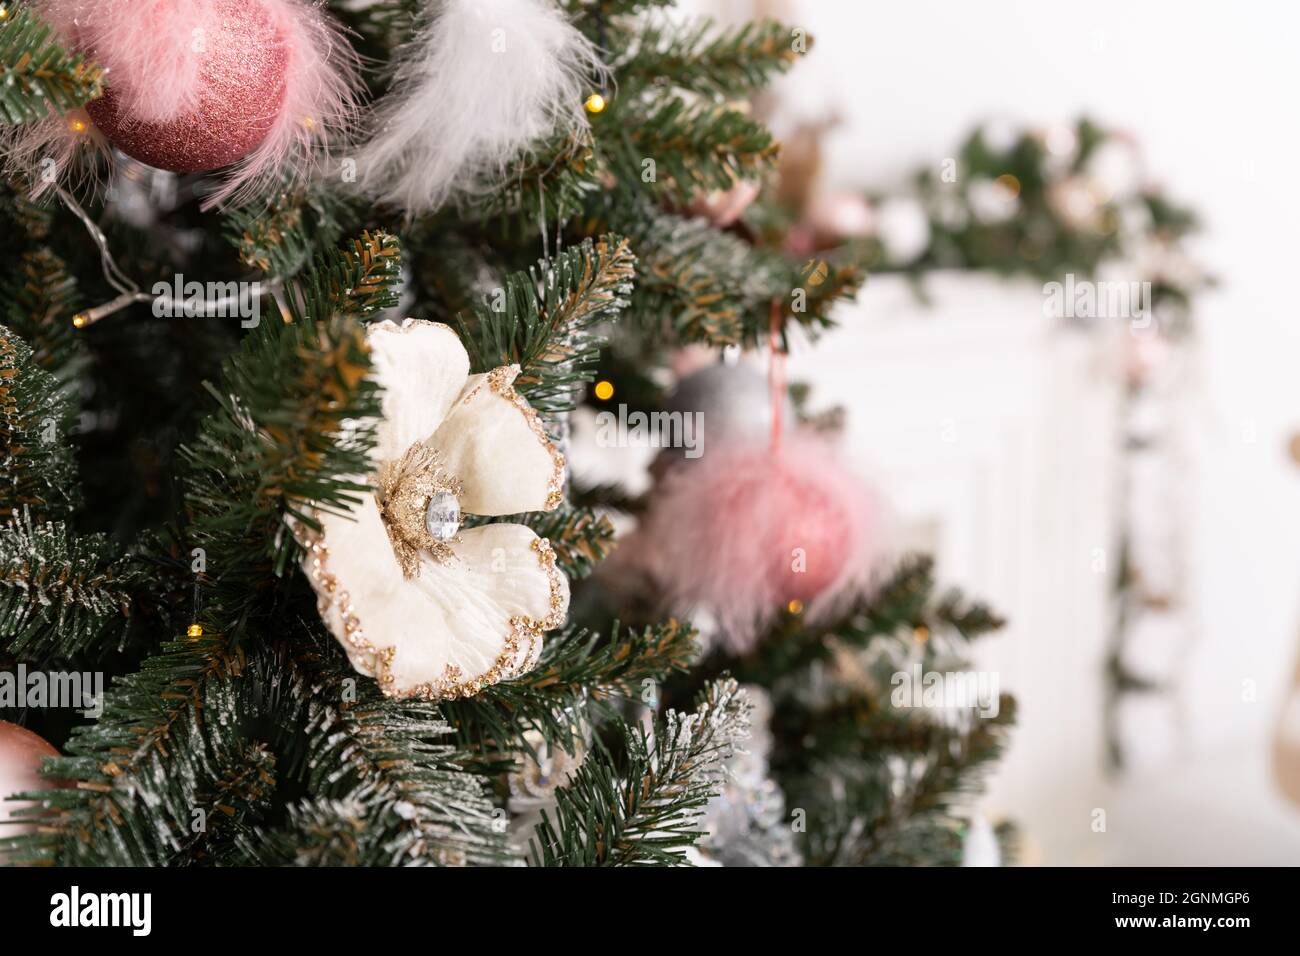 Christmas decorated tree in soft pink colors against the background of white classic fireplace with Christmas decorations. Details of New Year festive Stock Photo